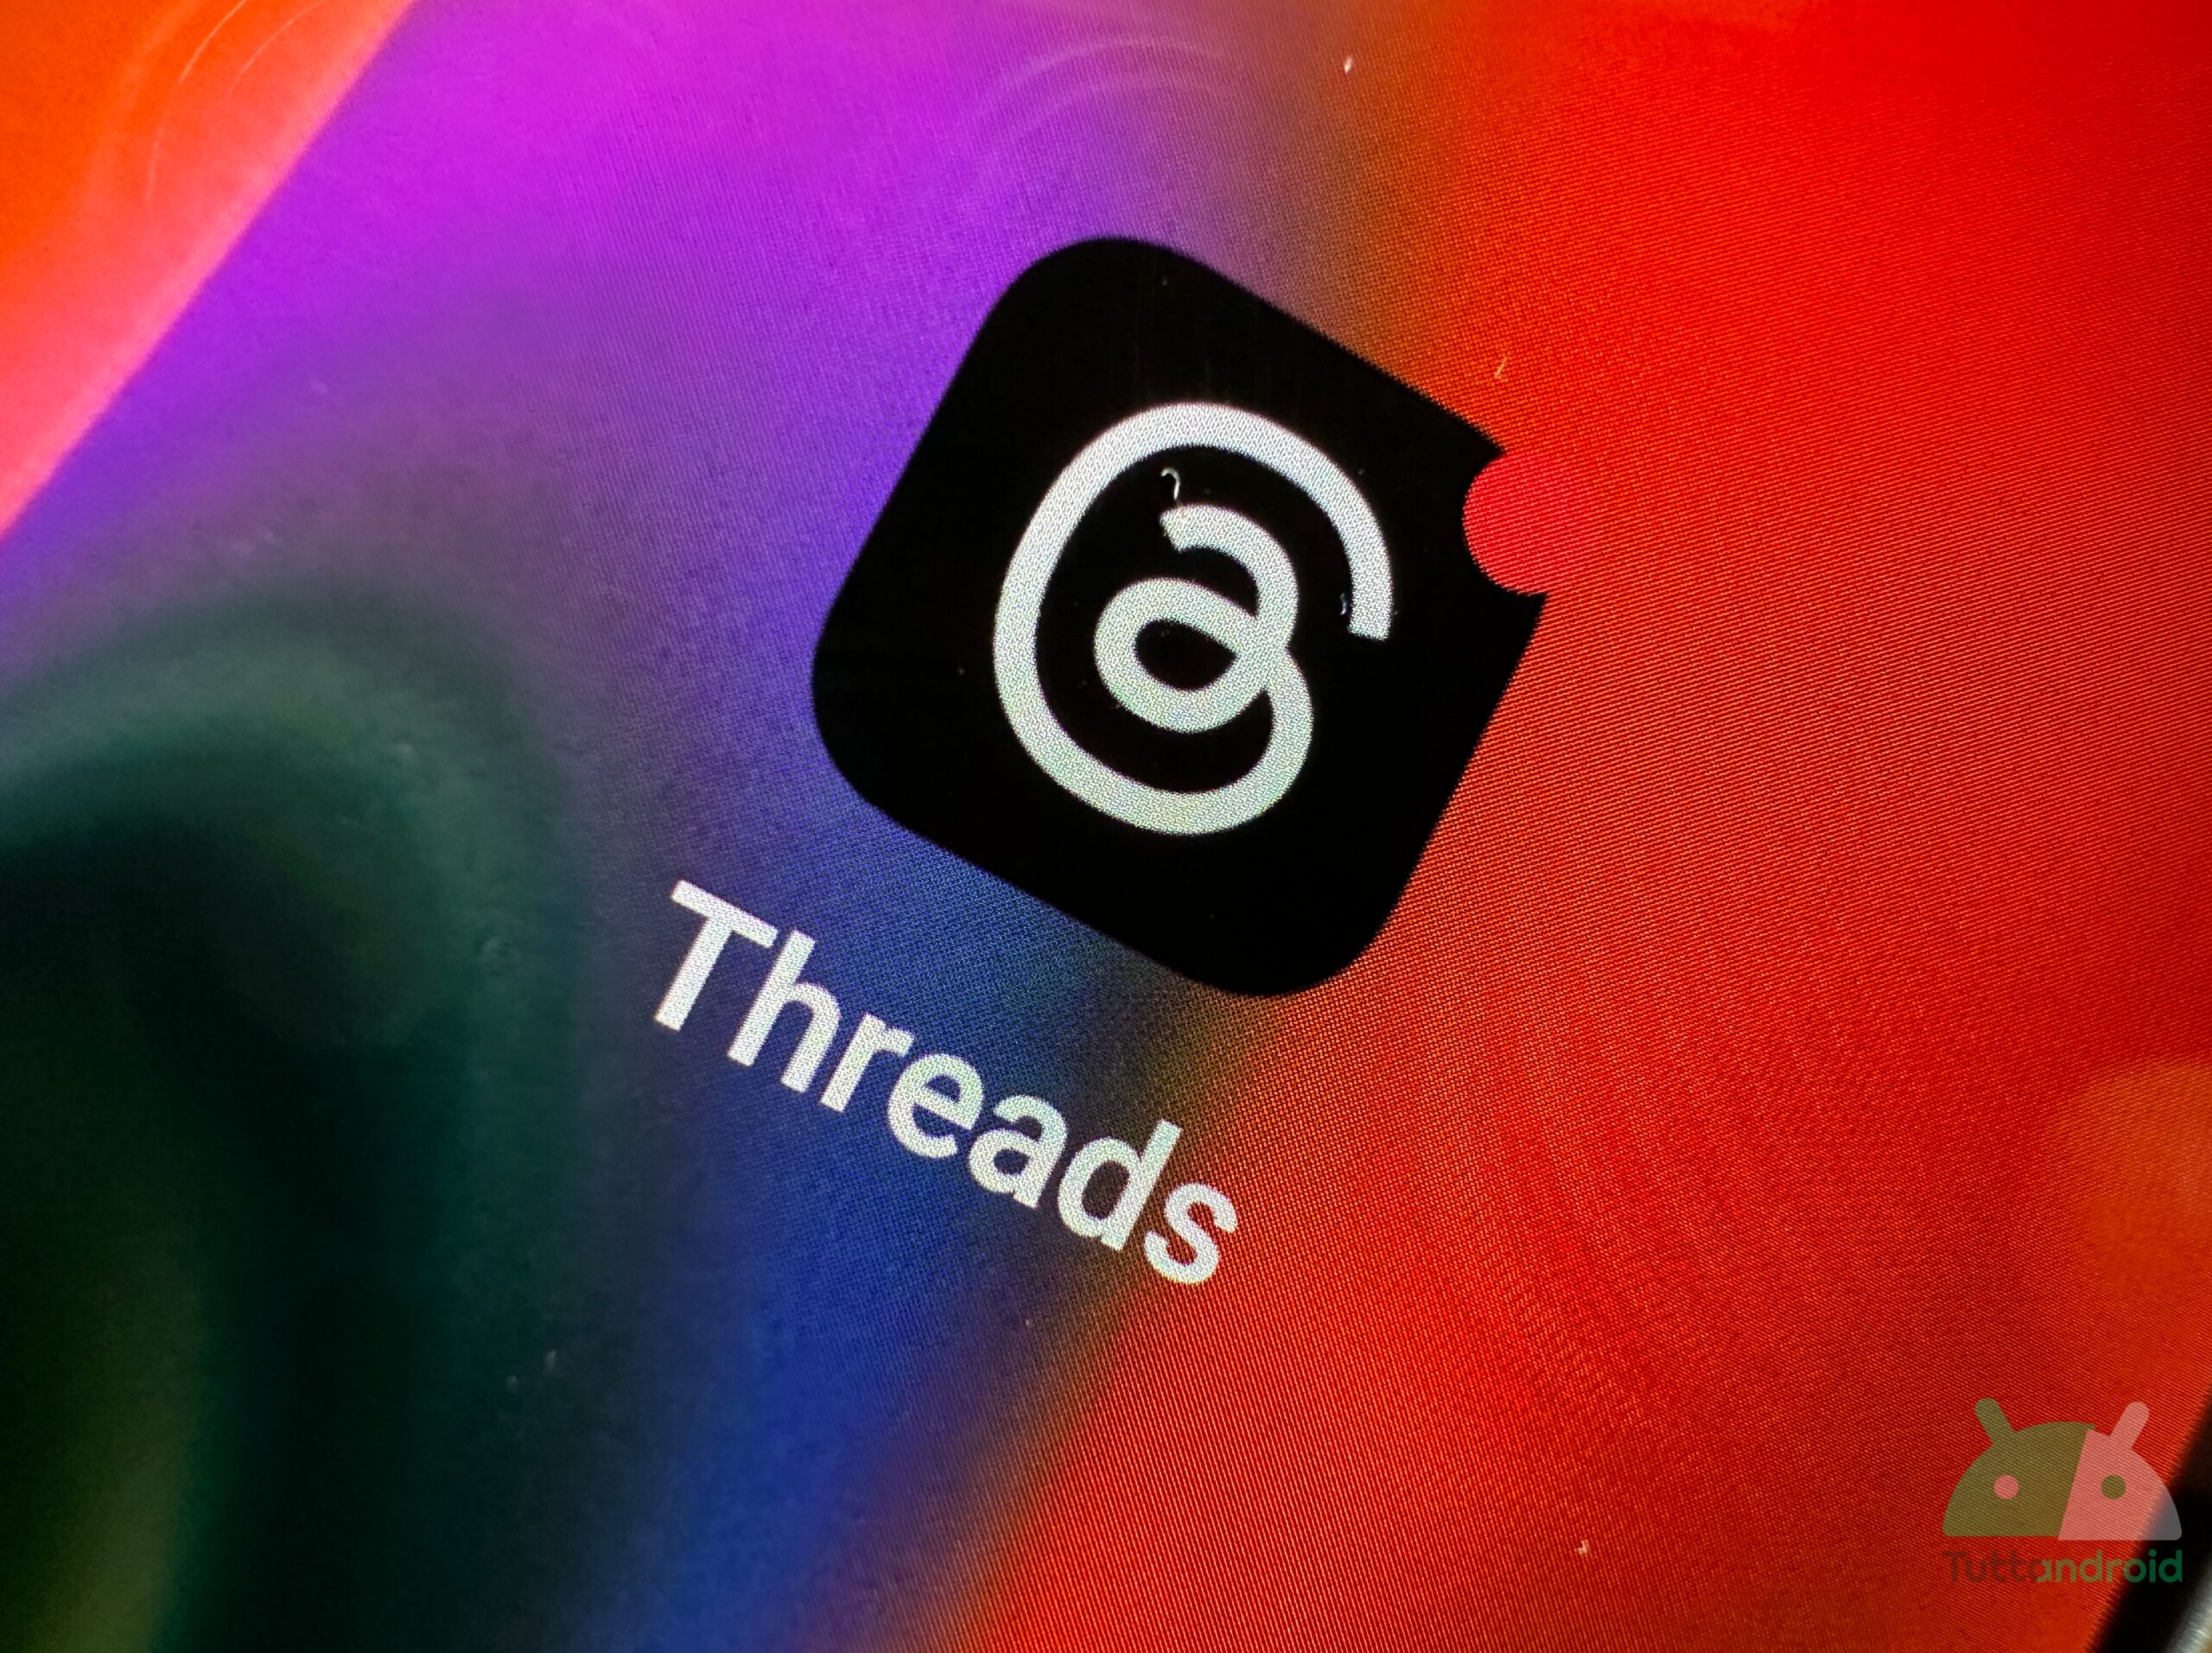 Threads could land in Europe to take advantage of X’s difficulties